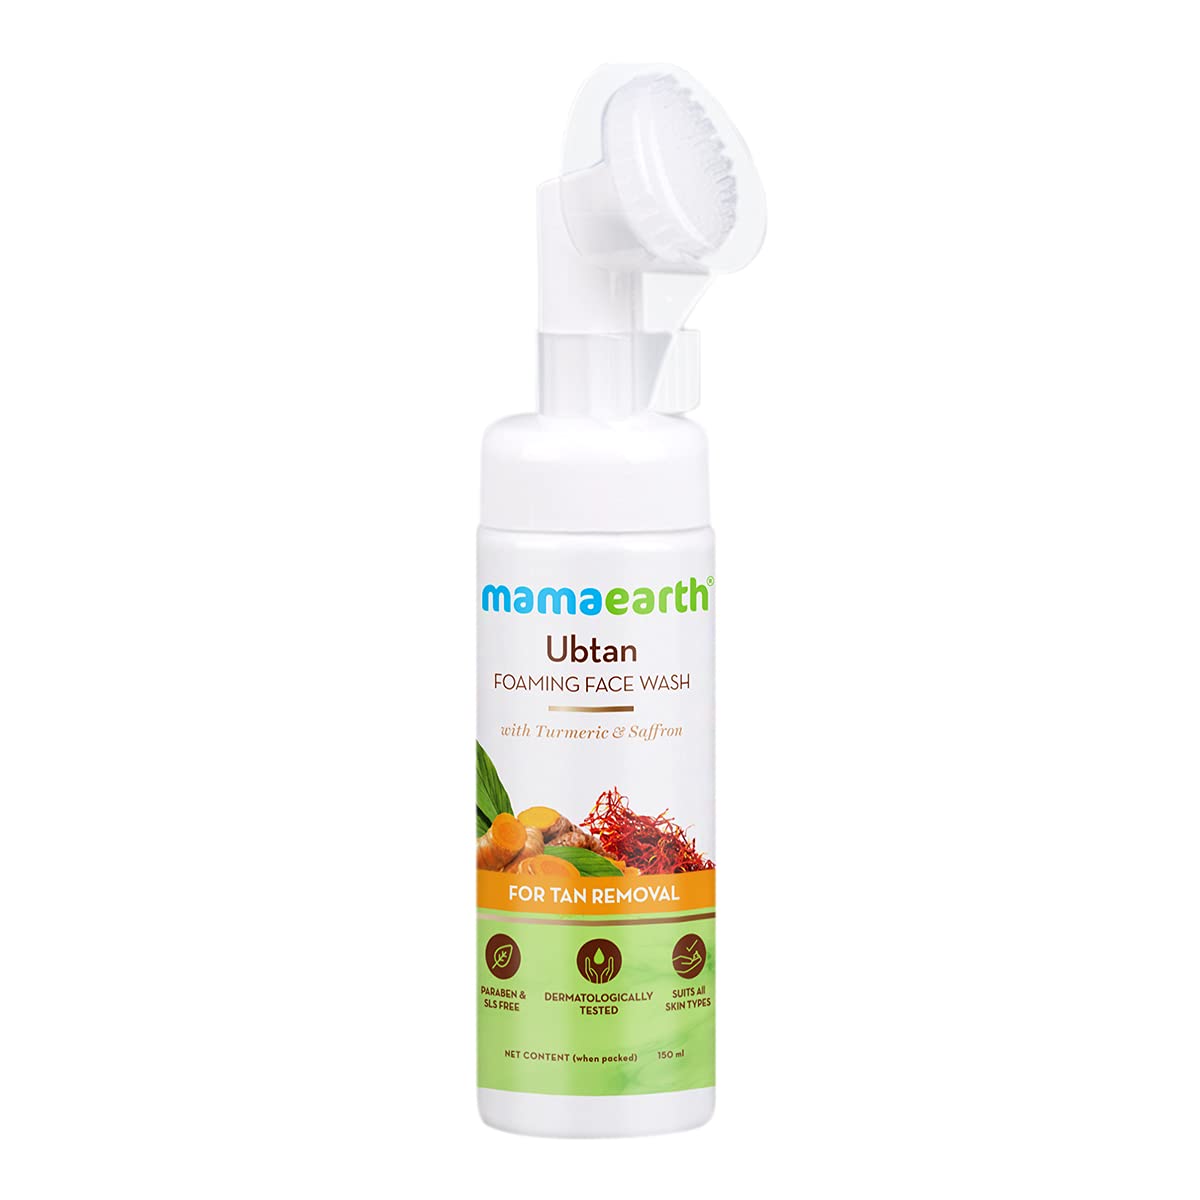 Mamaearth Ubtan Foaming Face Wash with Brush with Turmeric & Saffron for Tan Removal